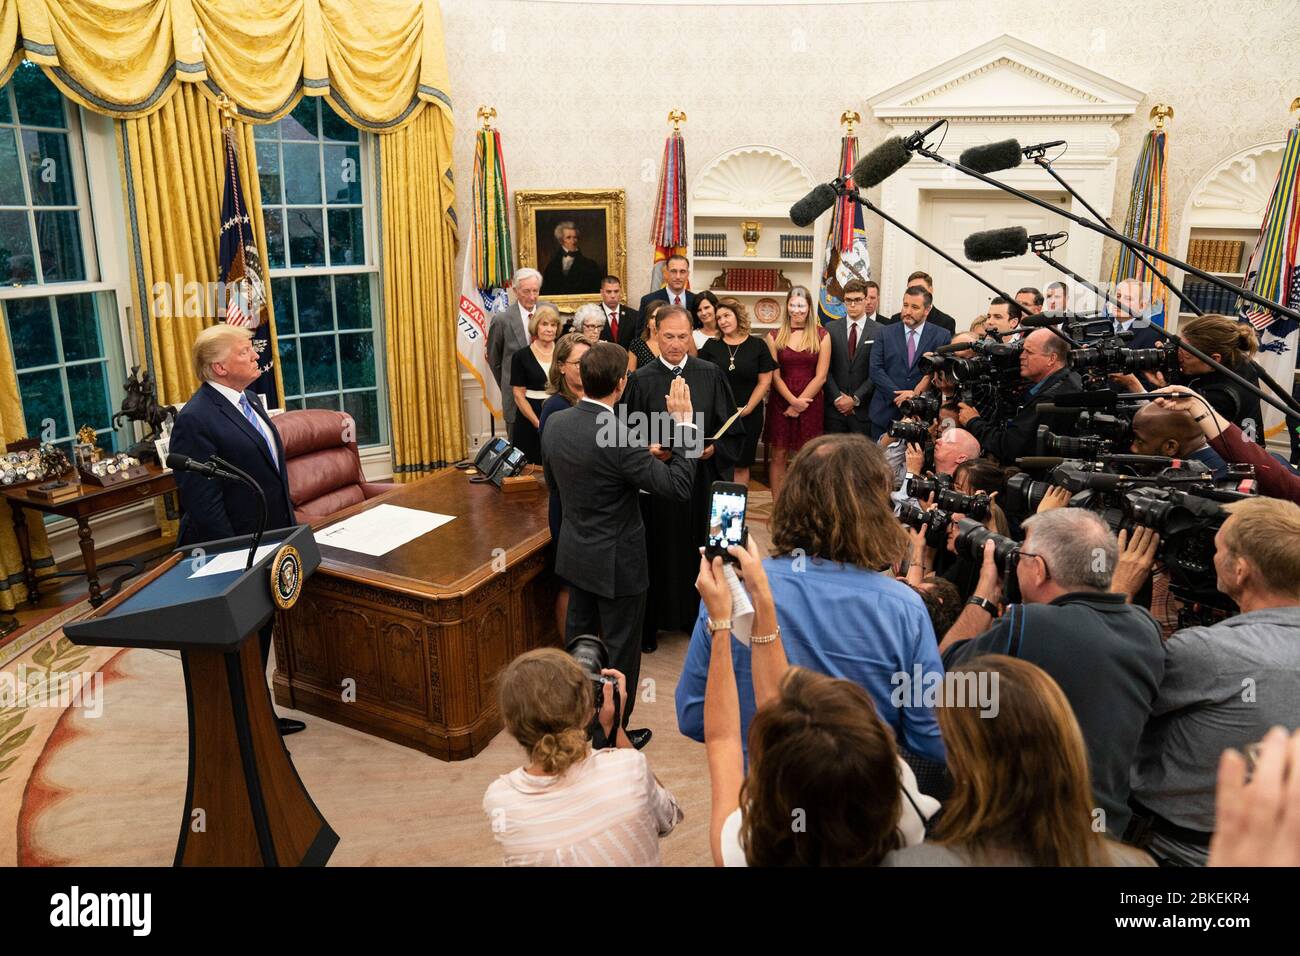 President Donald J. Trump watches as U.S. Supreme Court Associate Justice Samuel Alito swears-in new Secretary of Defense Mark Esper, joined by his wife Leah, Tuesday, July 23, 2019, in the Oval Office of the White House. Swearing-in Ceremony for Secretary of Defense Mark Esper Stock Photo